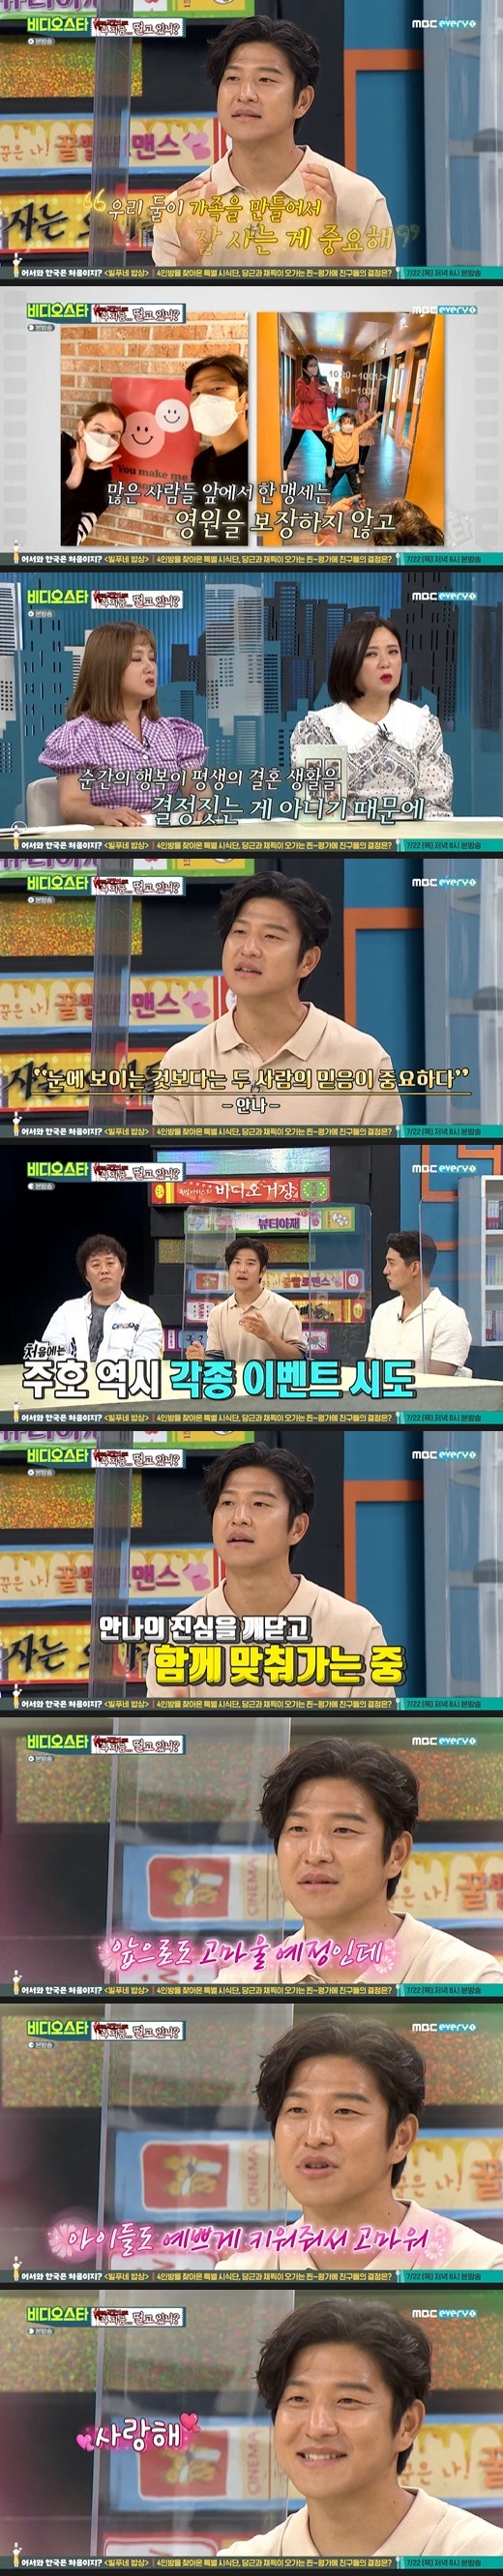 In Video Star, Park talked about his wife Anna from Switzerland.On the cable channel MBC Everlon Video Star broadcasted on the afternoon of the 20th, Am I shaking now? An unexpected cowardly feature was drawn.Talent Jung Jun-ha, soccer player Park Joo-ho, actor Choi Hyun-ho, comedian Seo Tae-hoon and others appeared as guests.On this day, Park Joo-ho confessed that he could not propose to his wife Anna.Anna is very realistic, he said. In fact, my wife said she did not need Wedding ceremony ceremony. It is the best thing if we make a family and live well.If you get married, it is nothing if you divorce. If you propose, it is nothing if you divorce. It is important to live well until the end.Park Joo-ho said, At first, I thought it was just words, and I tried, but I felt that the idea was real while I was together.He said to Anna, Thank you for supporting me and thank you for raising my children beautifully. I love you.